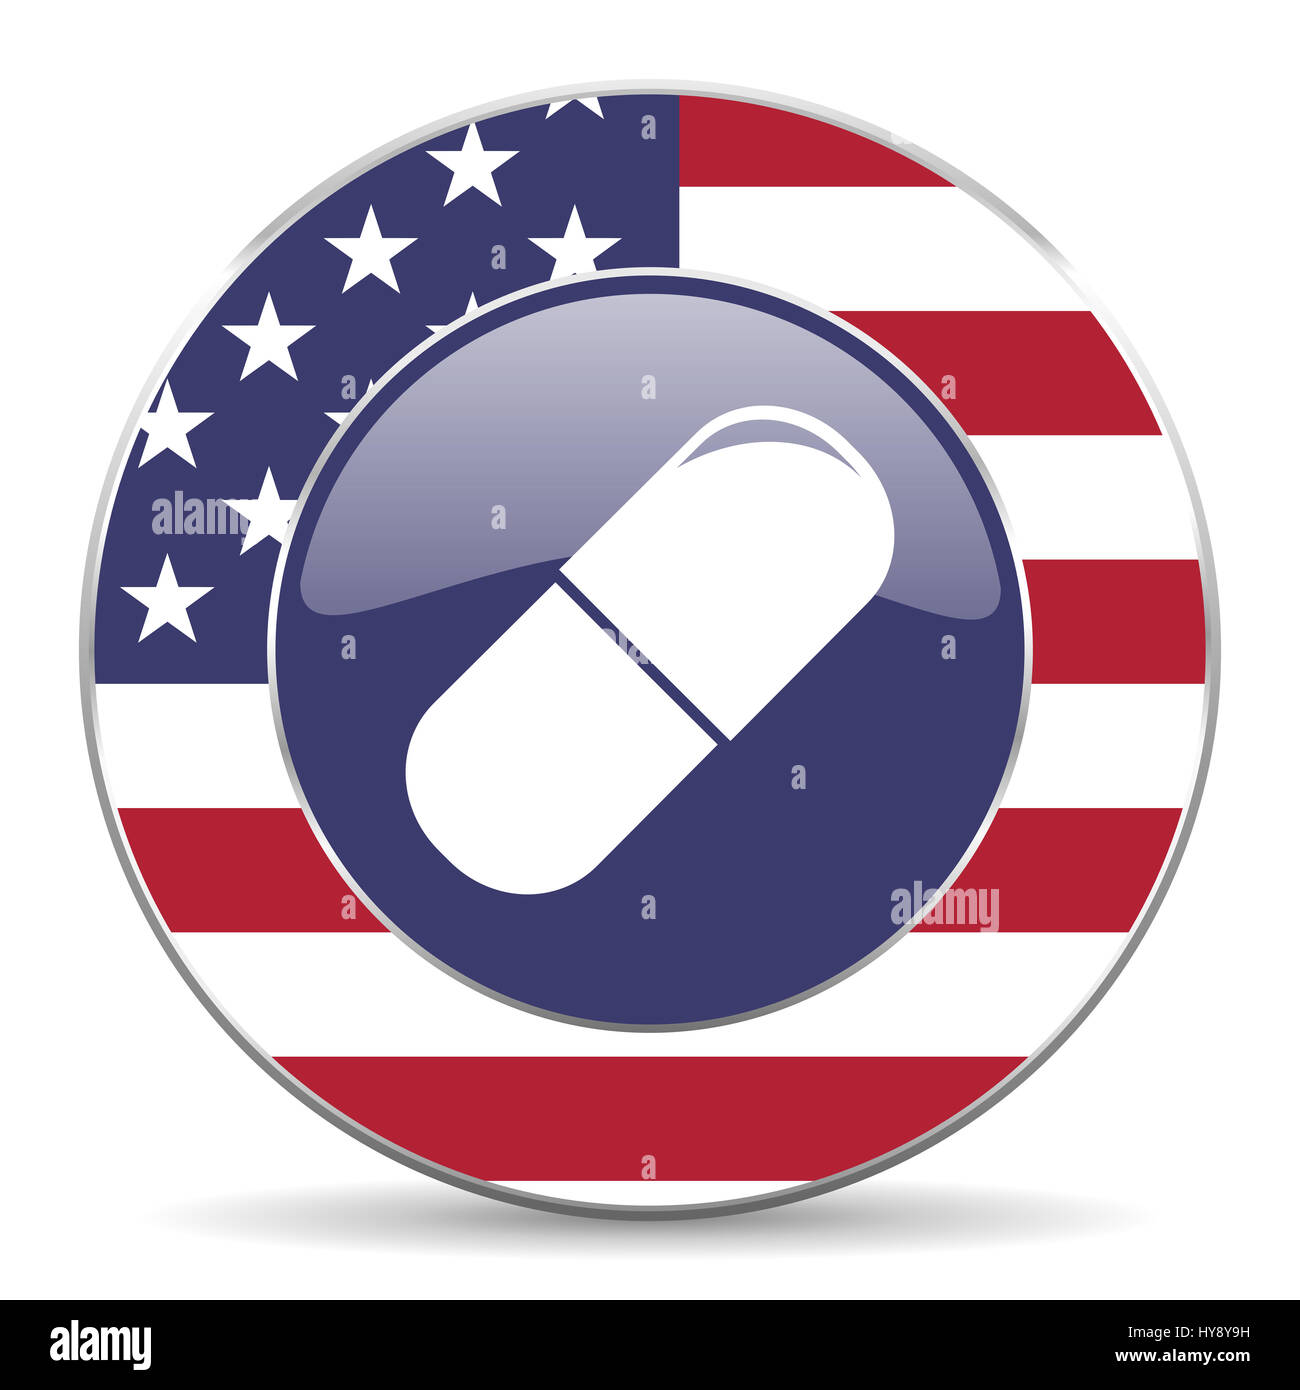 Drugs usa design web american round internet icon with shadow on white background. Stock Photo